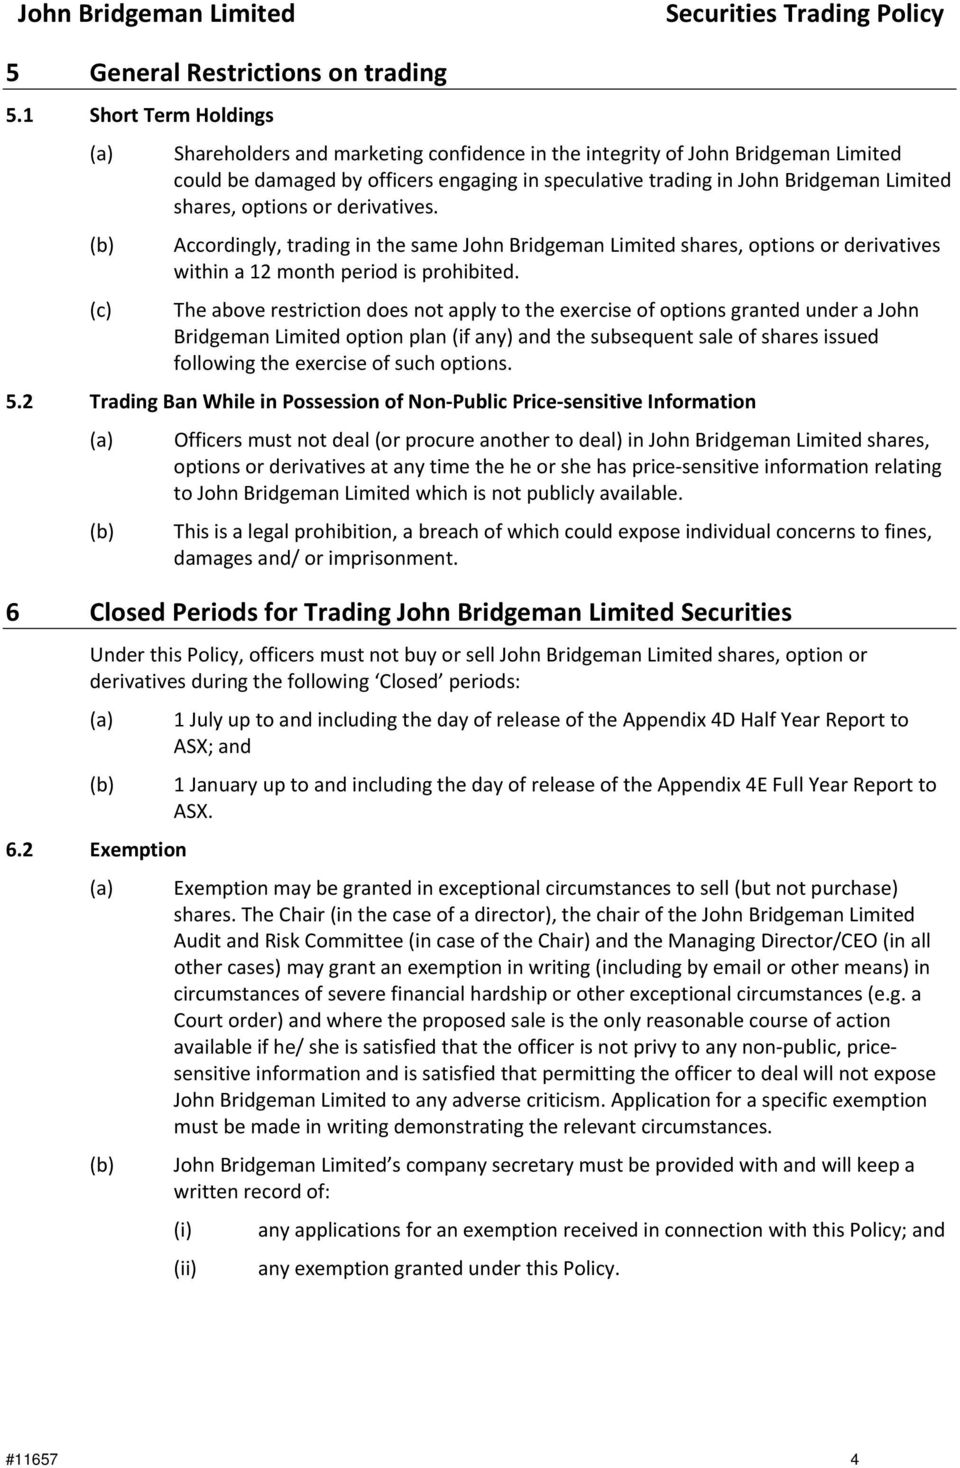 options or derivatives. Accordingly, trading in the same John Bridgeman Limited shares, options or derivatives within a 12 month period is prohibited.